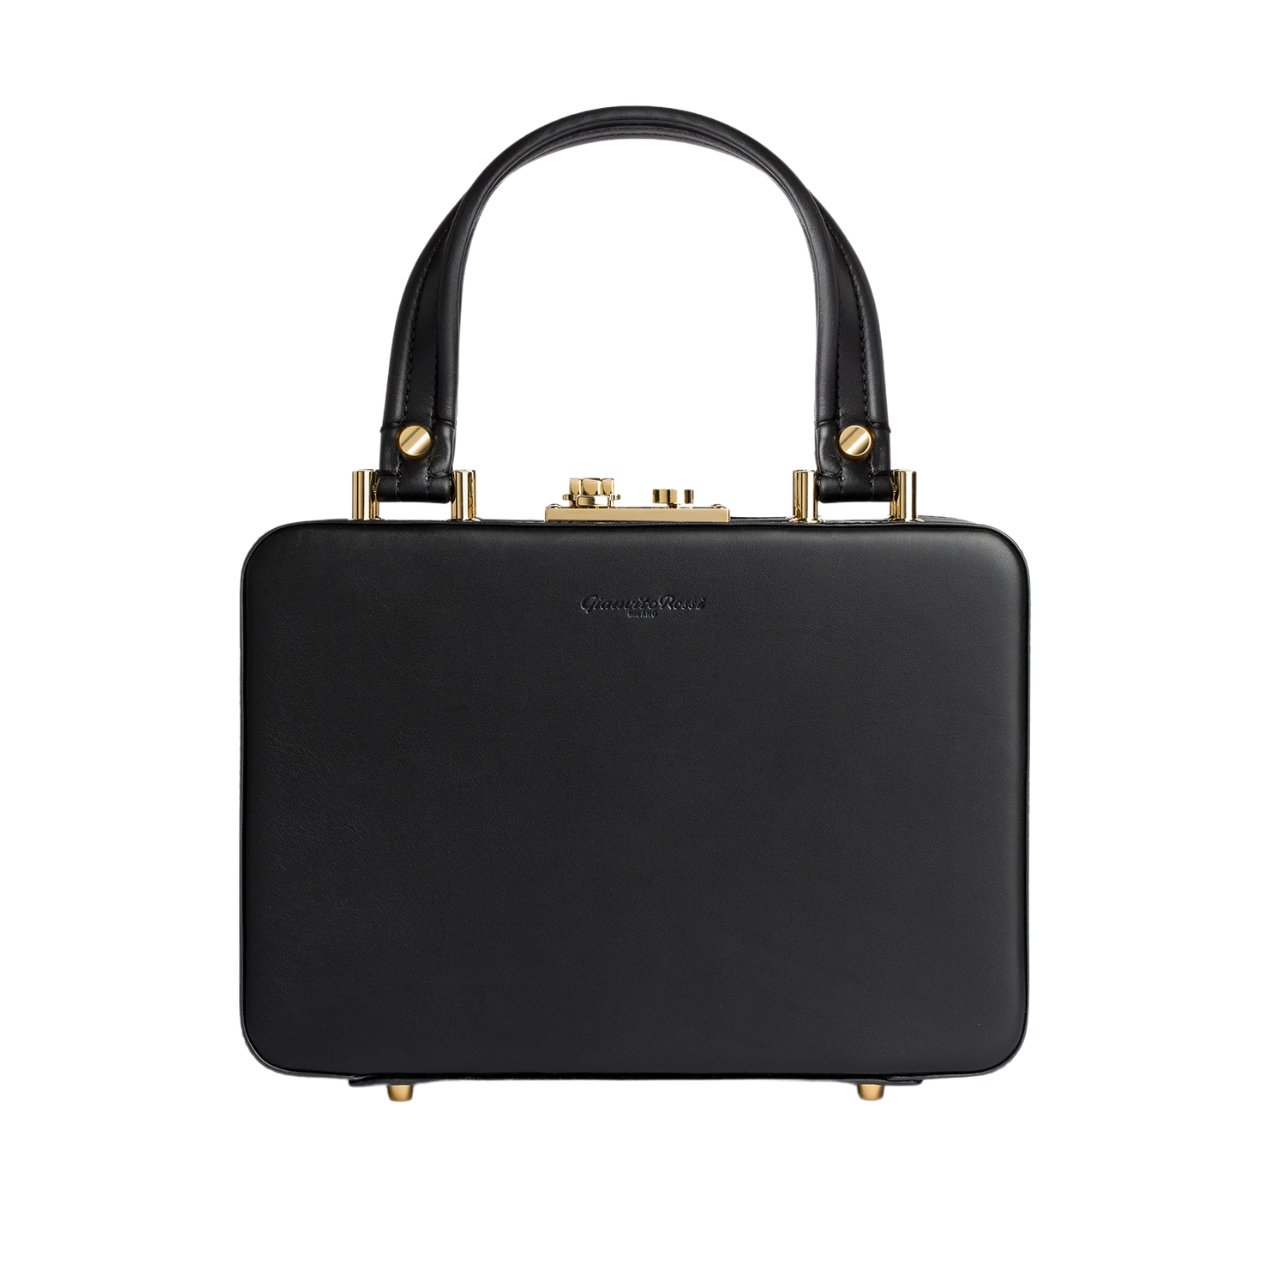 Gianvito Rossi’s leather box top-handle Valì bag in black